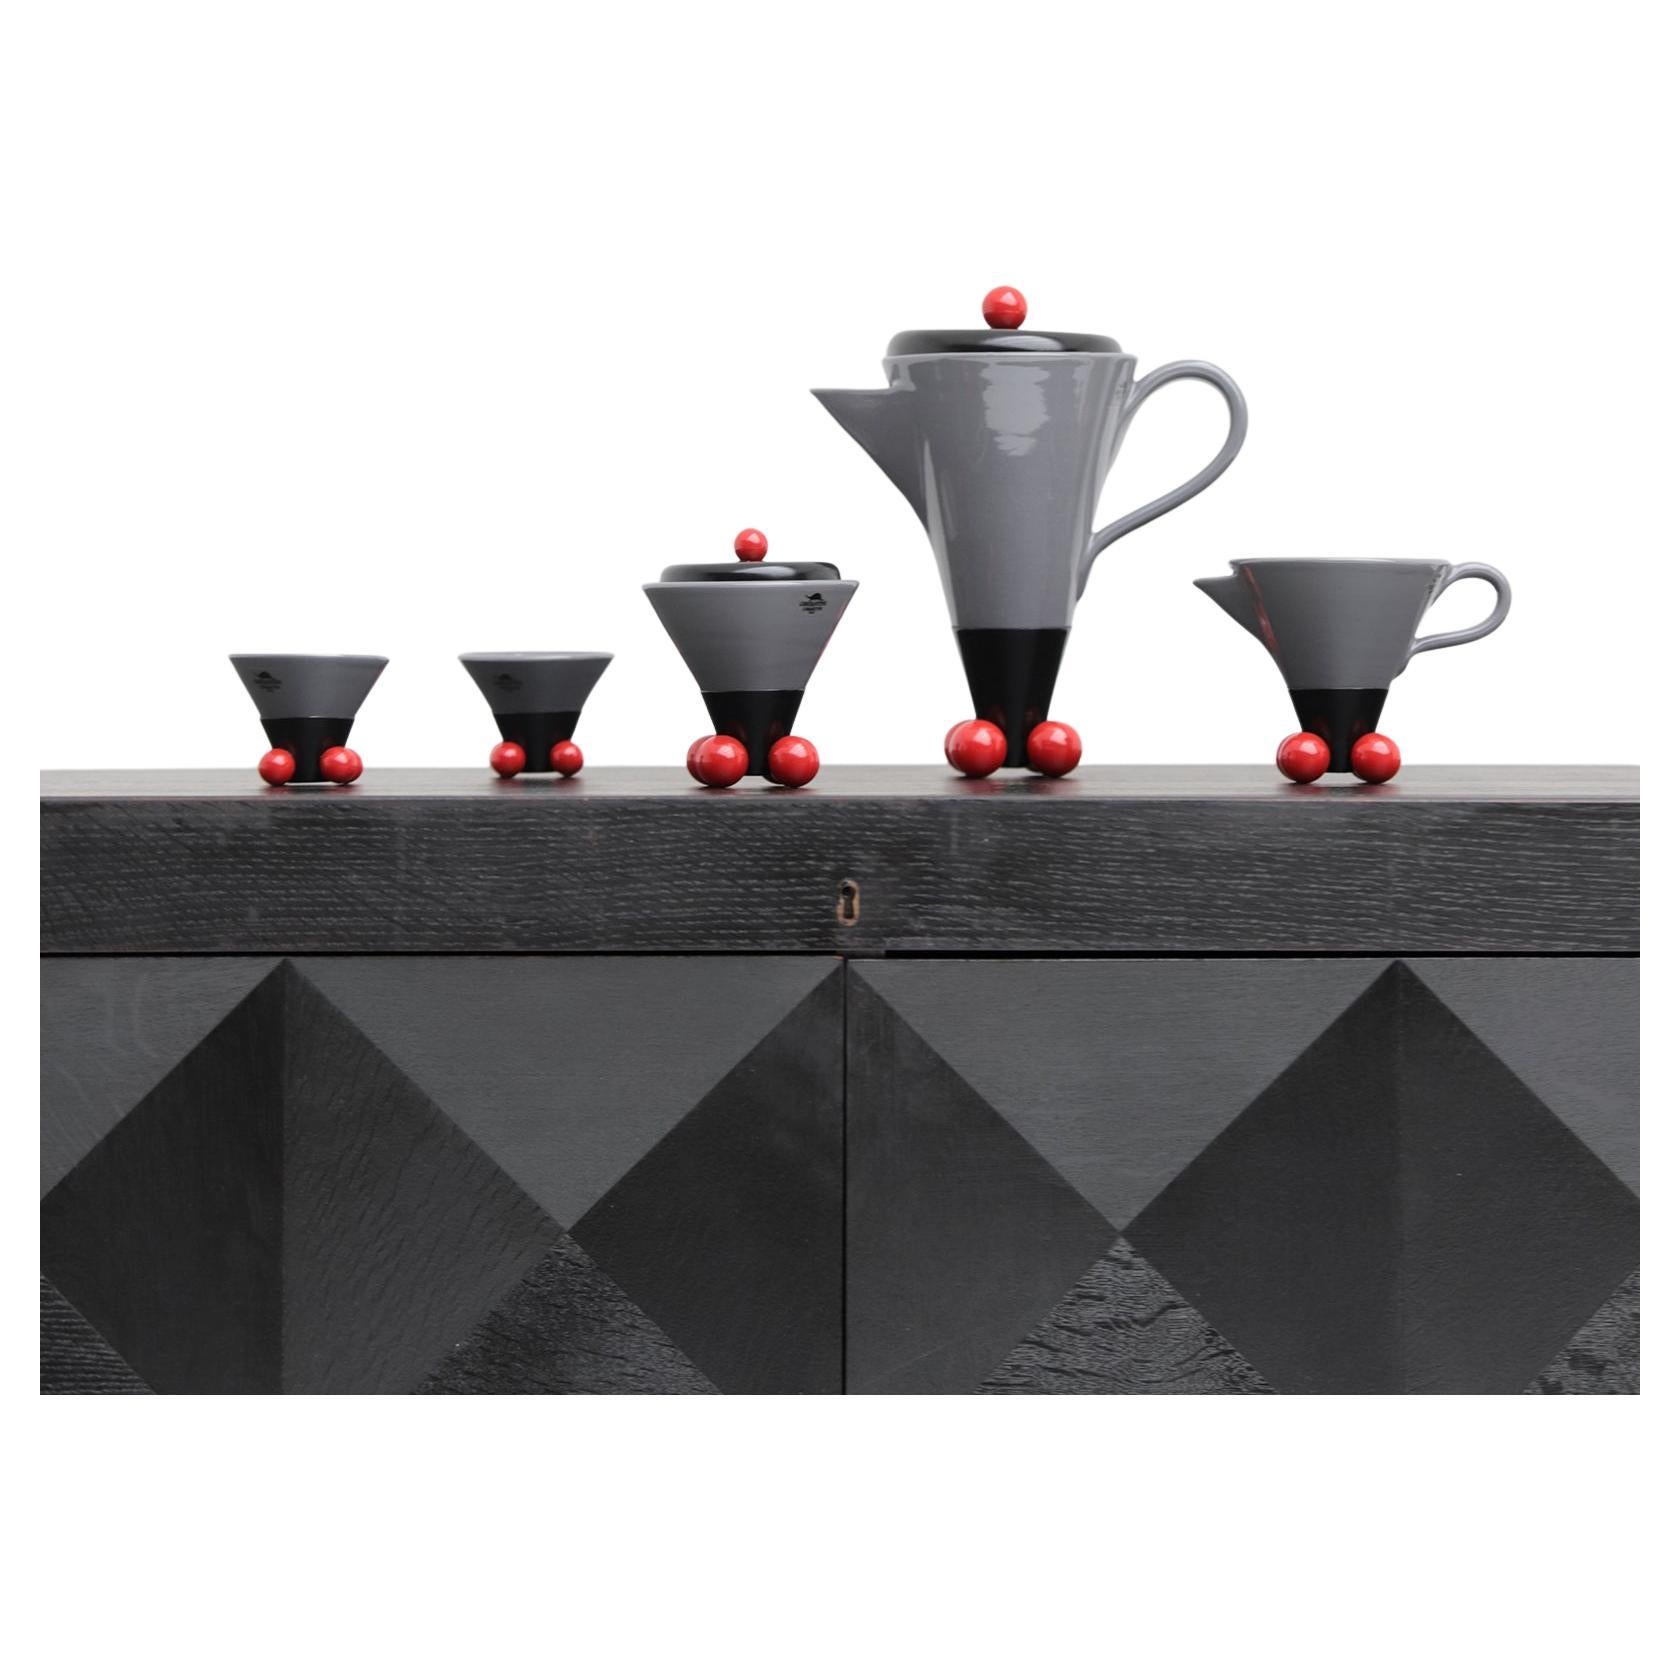 Memphis coffee set by Pietro D'Amato, manufactured by Costantini l’Oggetto 1980